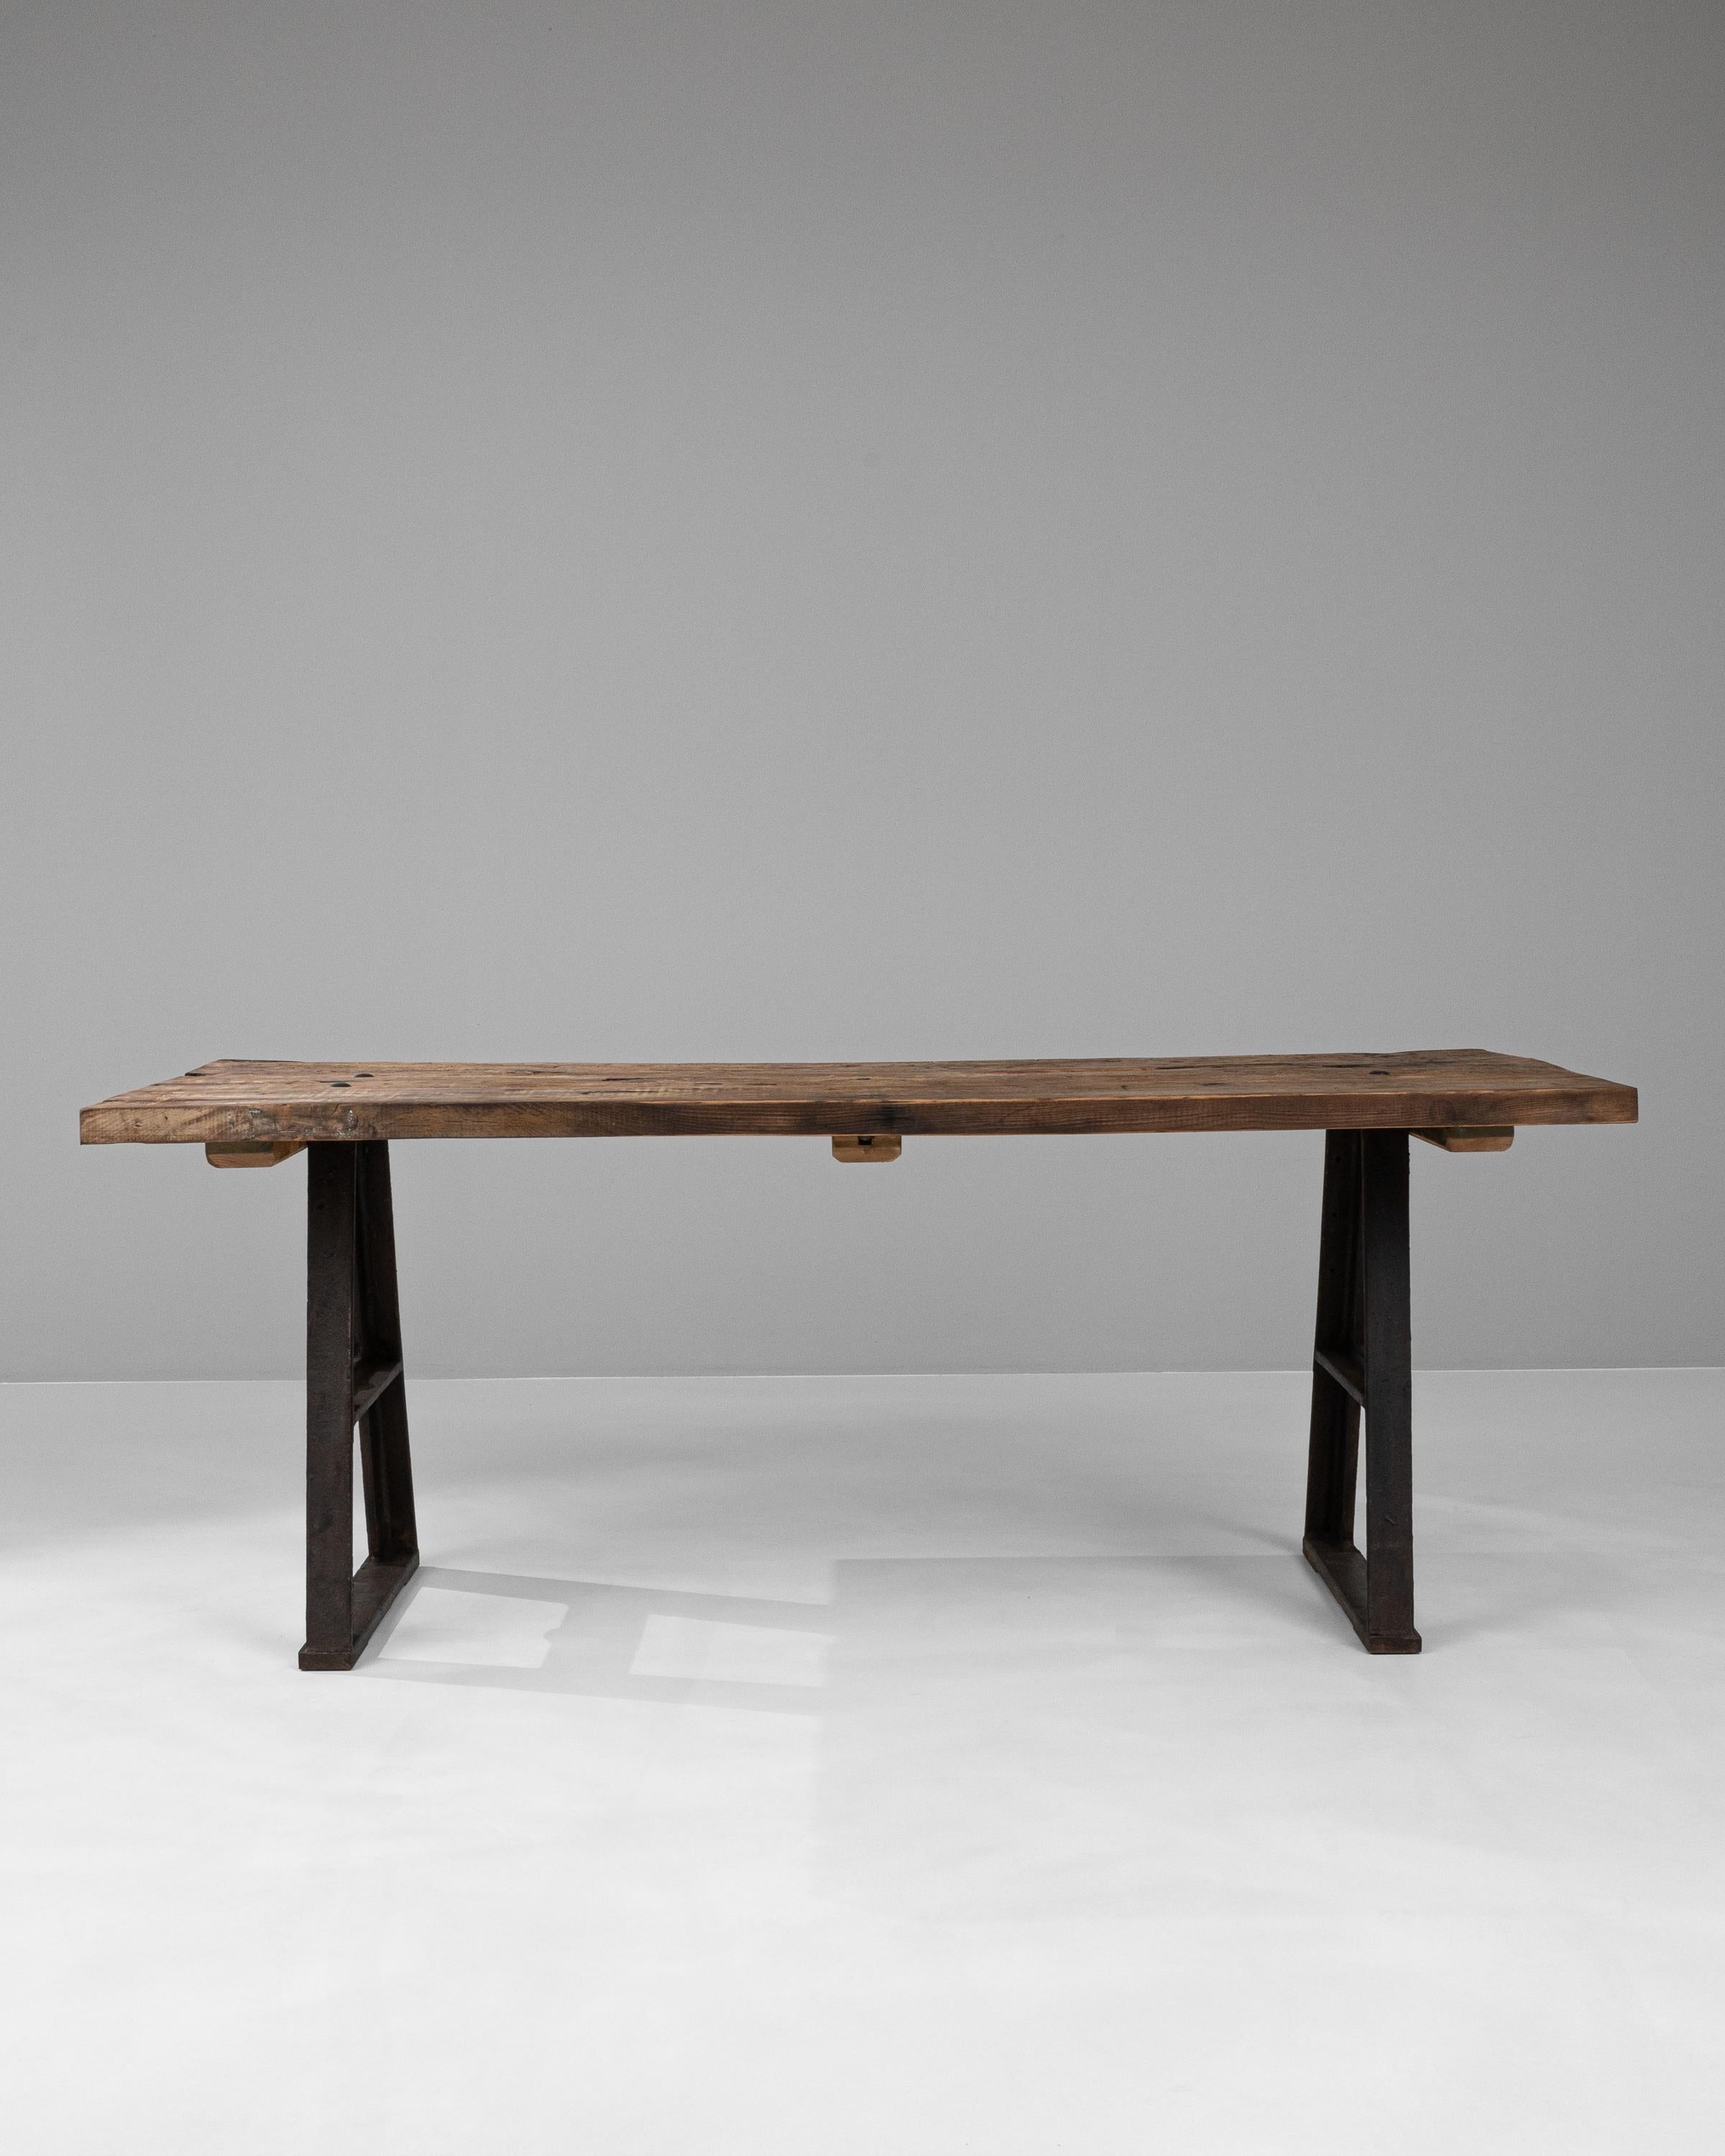 This Early 20th Century French Industrial Table is a splendid representation of utilitarian design fused with rustic charm. Its robust, dark iron legs flaunt a unique A-frame shape, indicative of the industrial era's focus on strength and